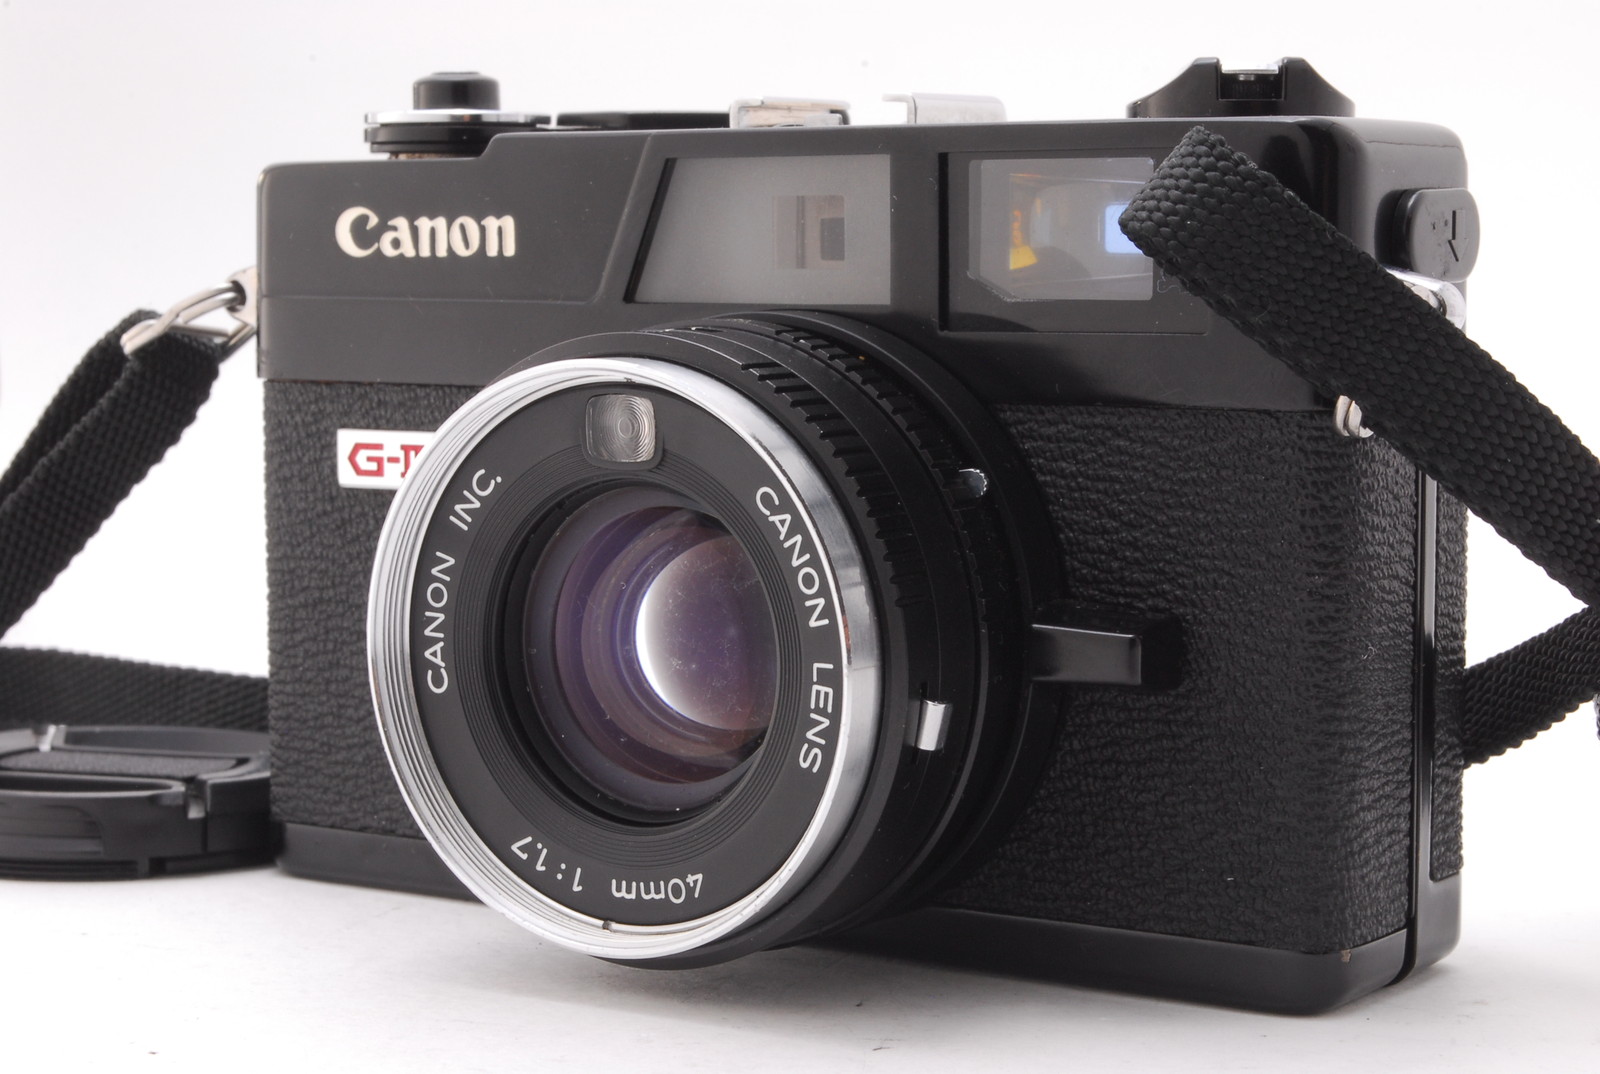 PROMOTION.😊 EXC++++ Canon Canonet QL17 G-III G3 Black 35mm Film Rangefinder from Japan